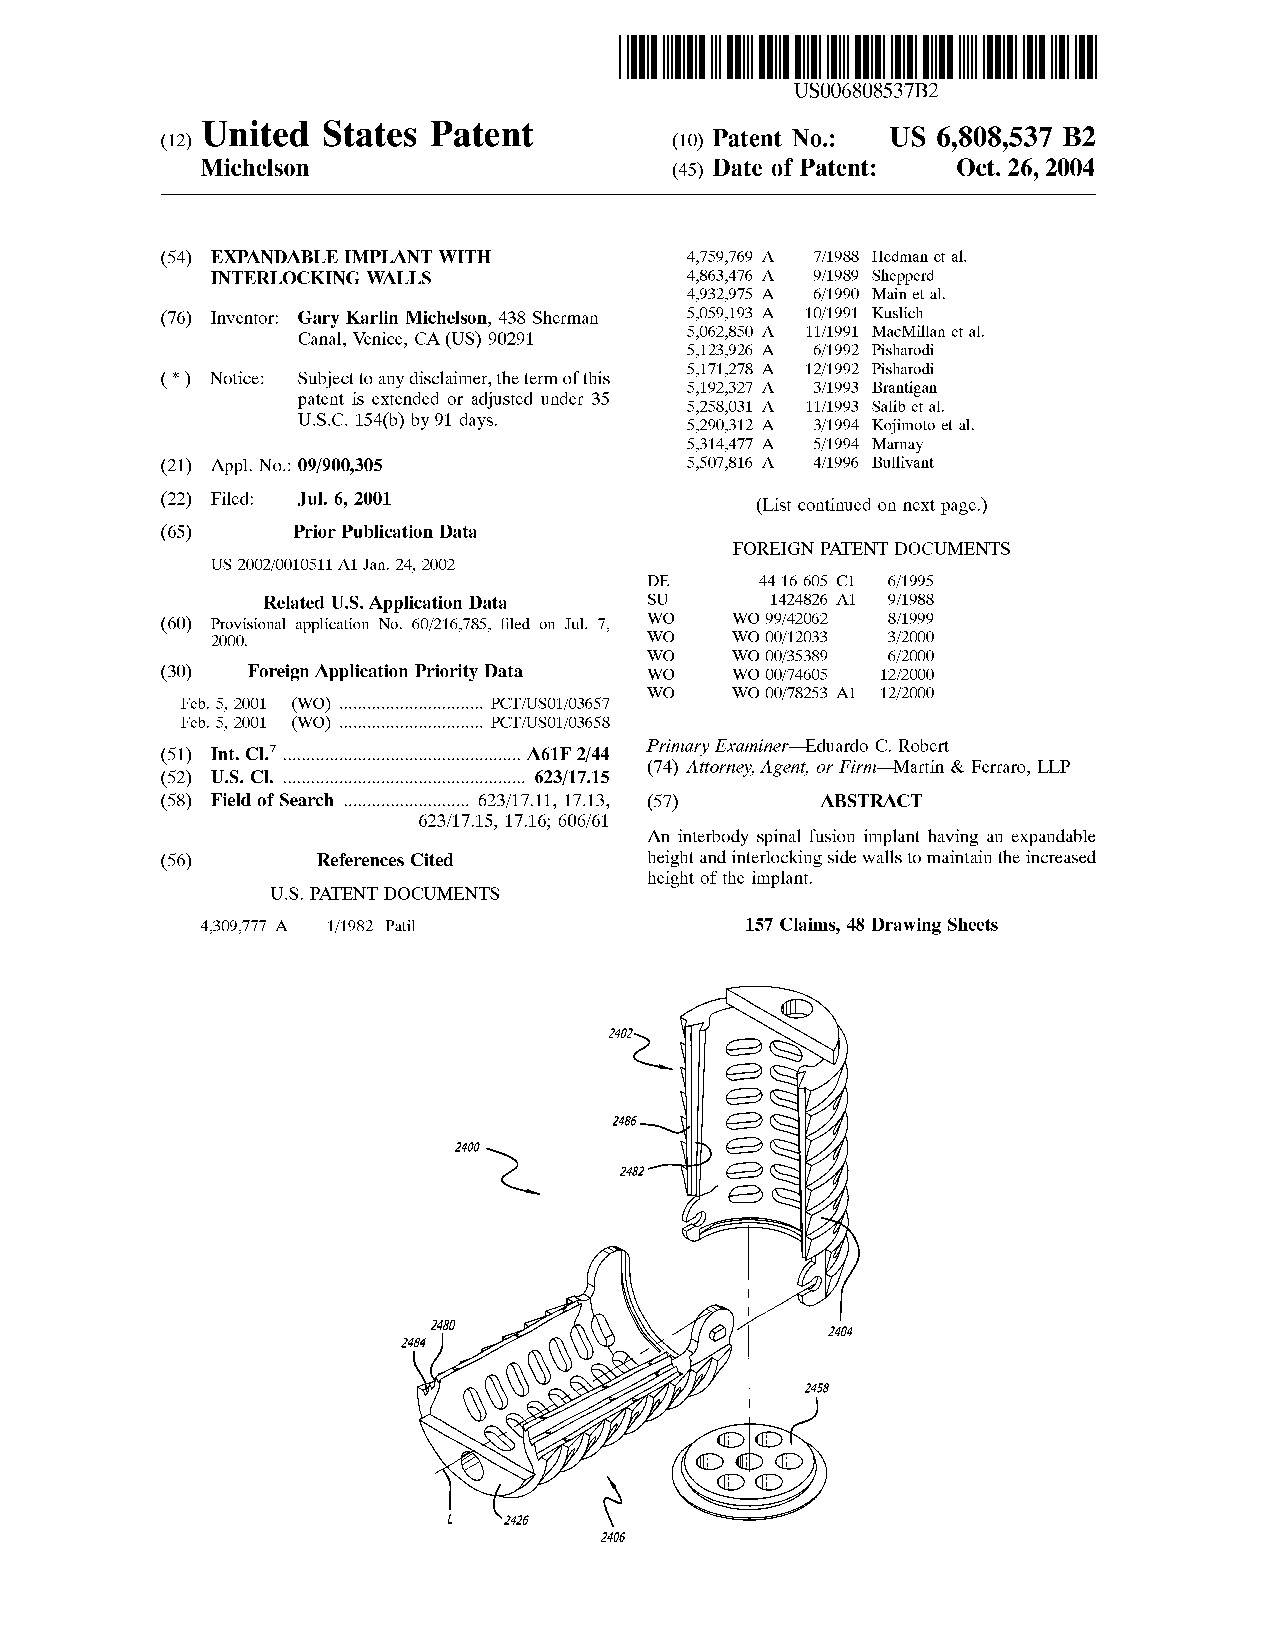 Expandable implant with interlocking walls - Patent 6,808,537